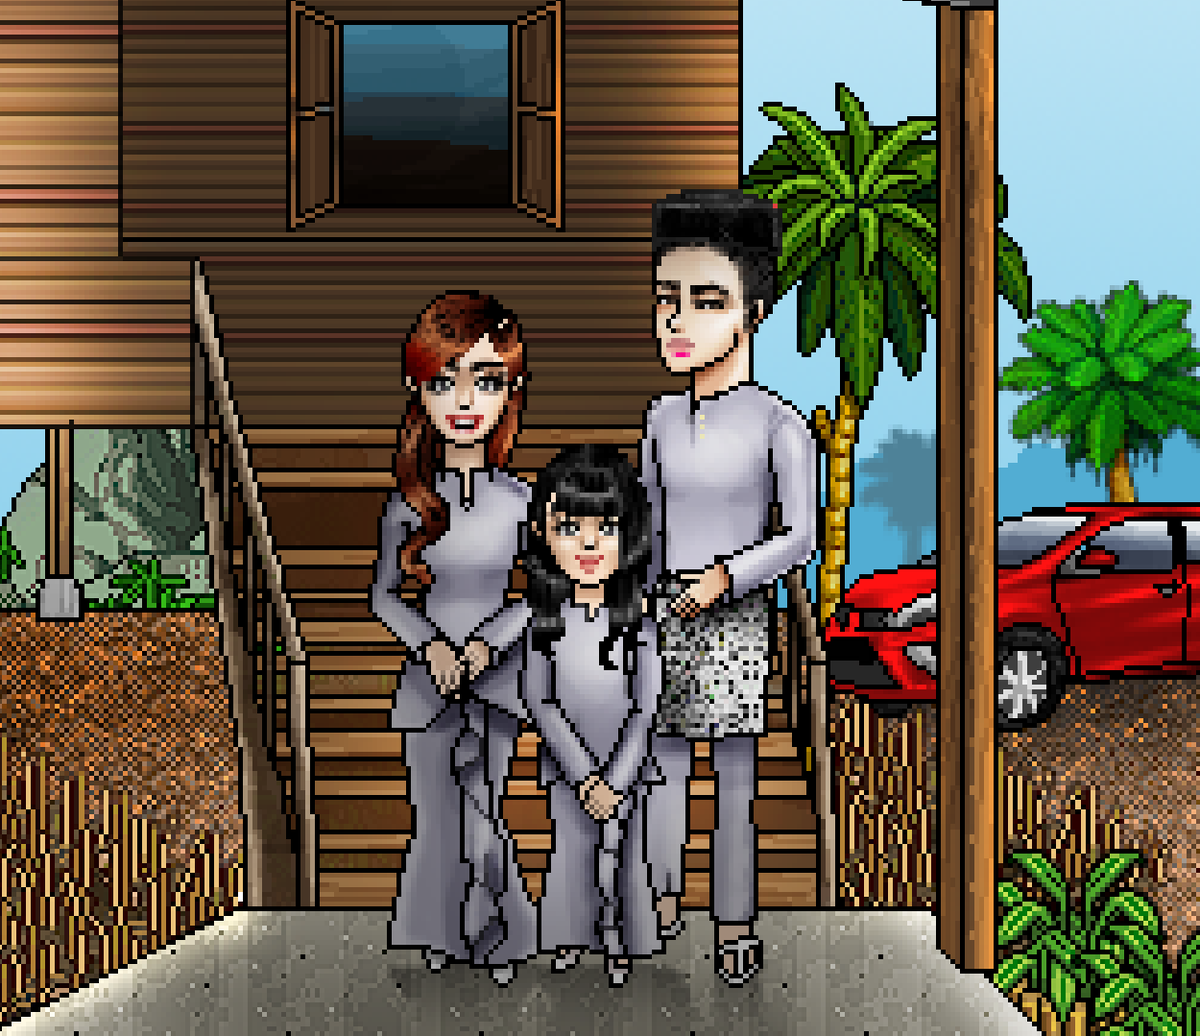 #MIZZES #Dalinly #Dalinda Happy Eid Mubarak To All!❤️ Stay close with your loved ones, and appreciate them before its too late. 🥰 Time is short. You and I won`t be staying long here😢.

ANYWAYS! Have a great day everyone.

#Mizzes
#Habbo
#Roleplay
#eidmubarak #selamathariraya